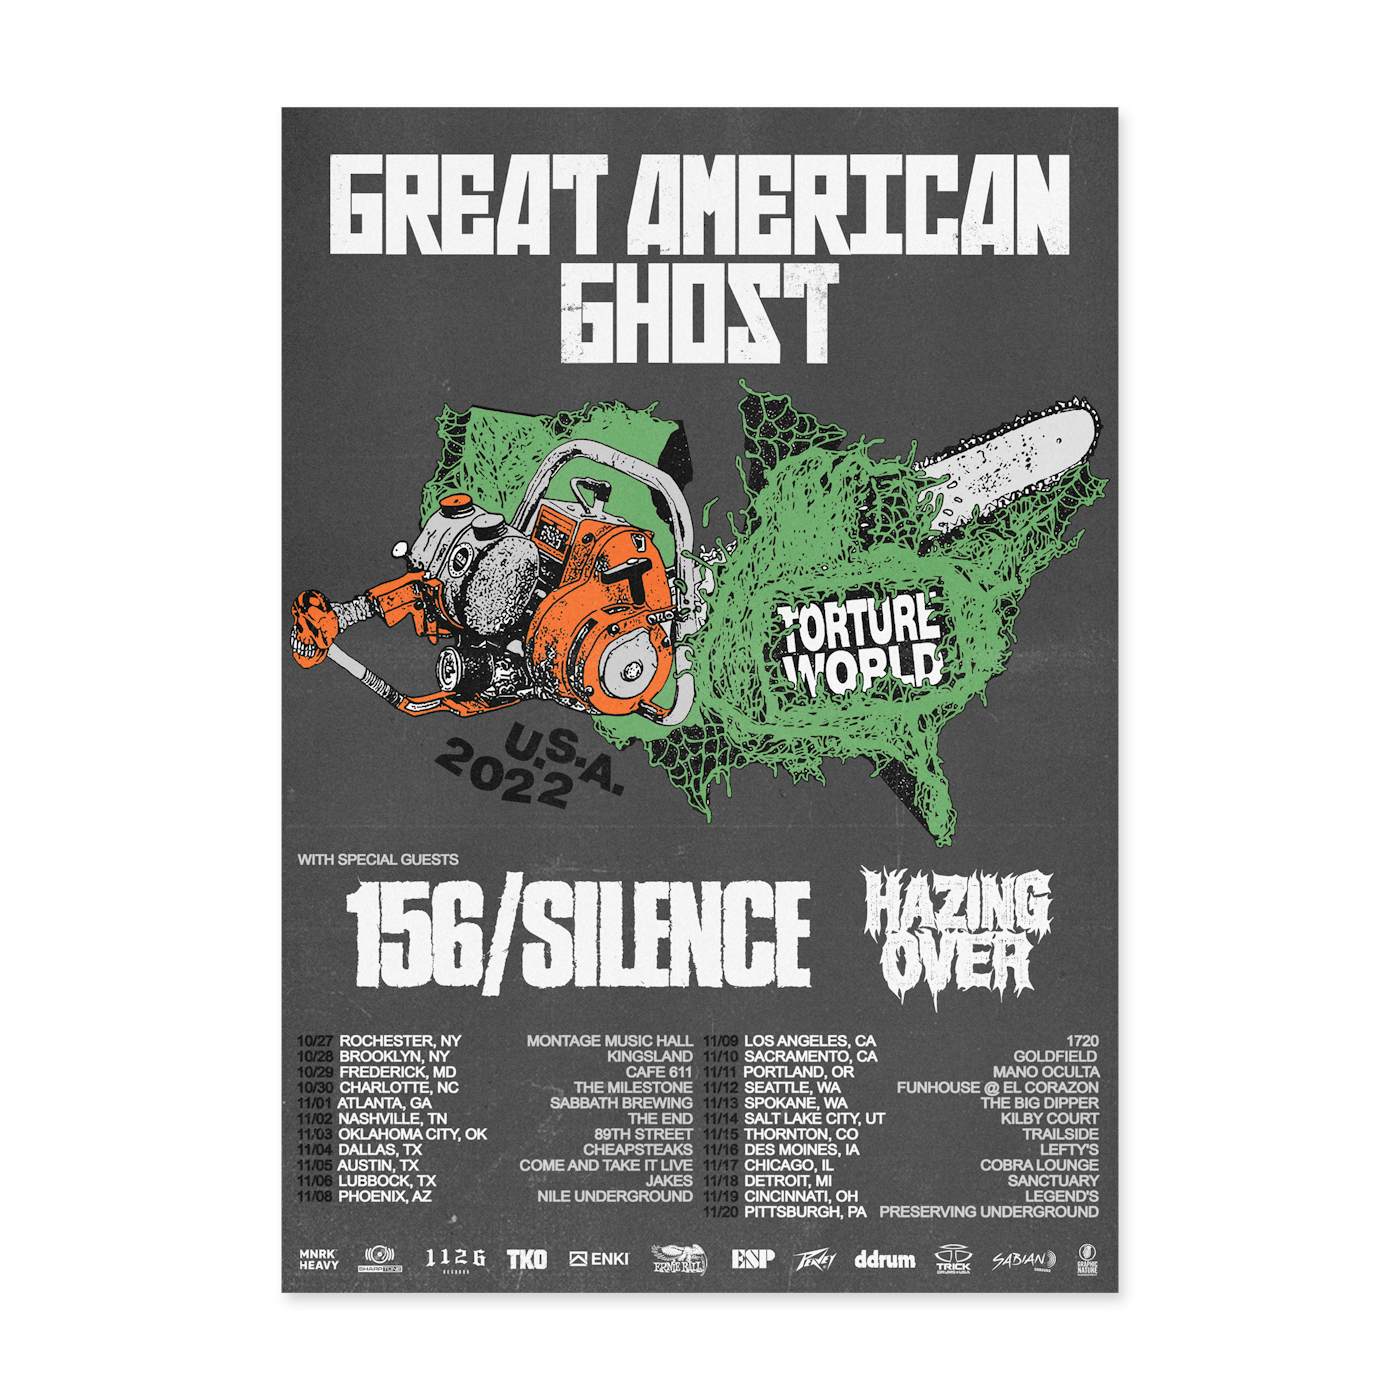 Great American Ghost - Torture World Tour Poster